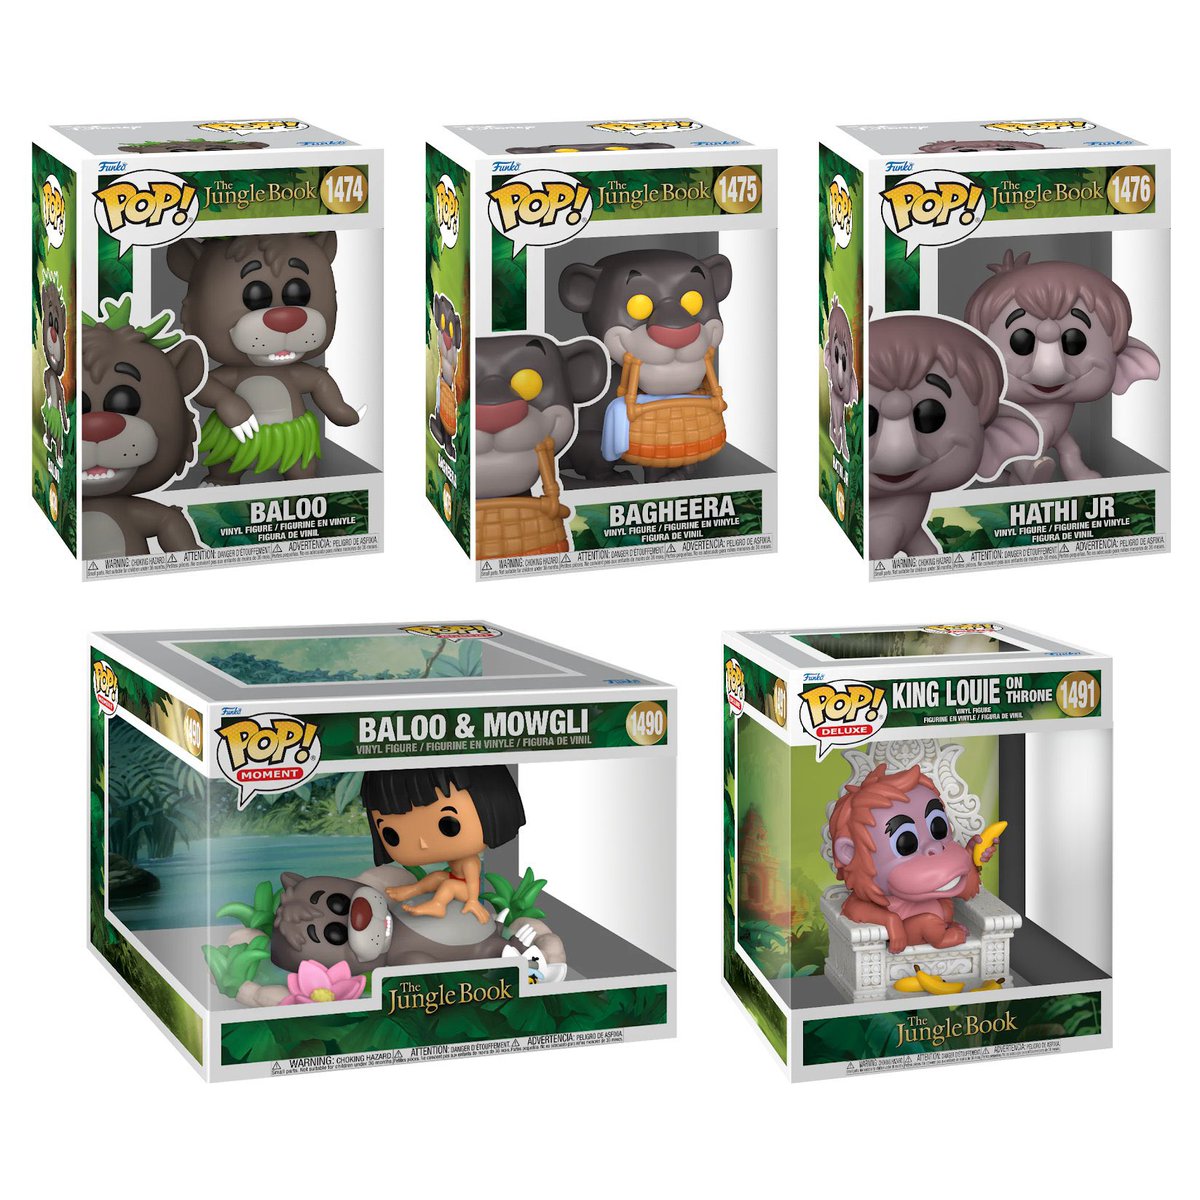 Preorder Now: Funko Pop! Disney: The Jungle Book 📦 Amazon: amzn.to/4agF2nP 🌎 Ent Earth: ee.toys/EM5MNX * No Charge Until it Ships #Ad #Funko #FunkoPop #FunkoPops #FunkoPopVinyl #Pop #PopVinyl #FunkoCollector #Collectible #Collectibles #Toy #Toys